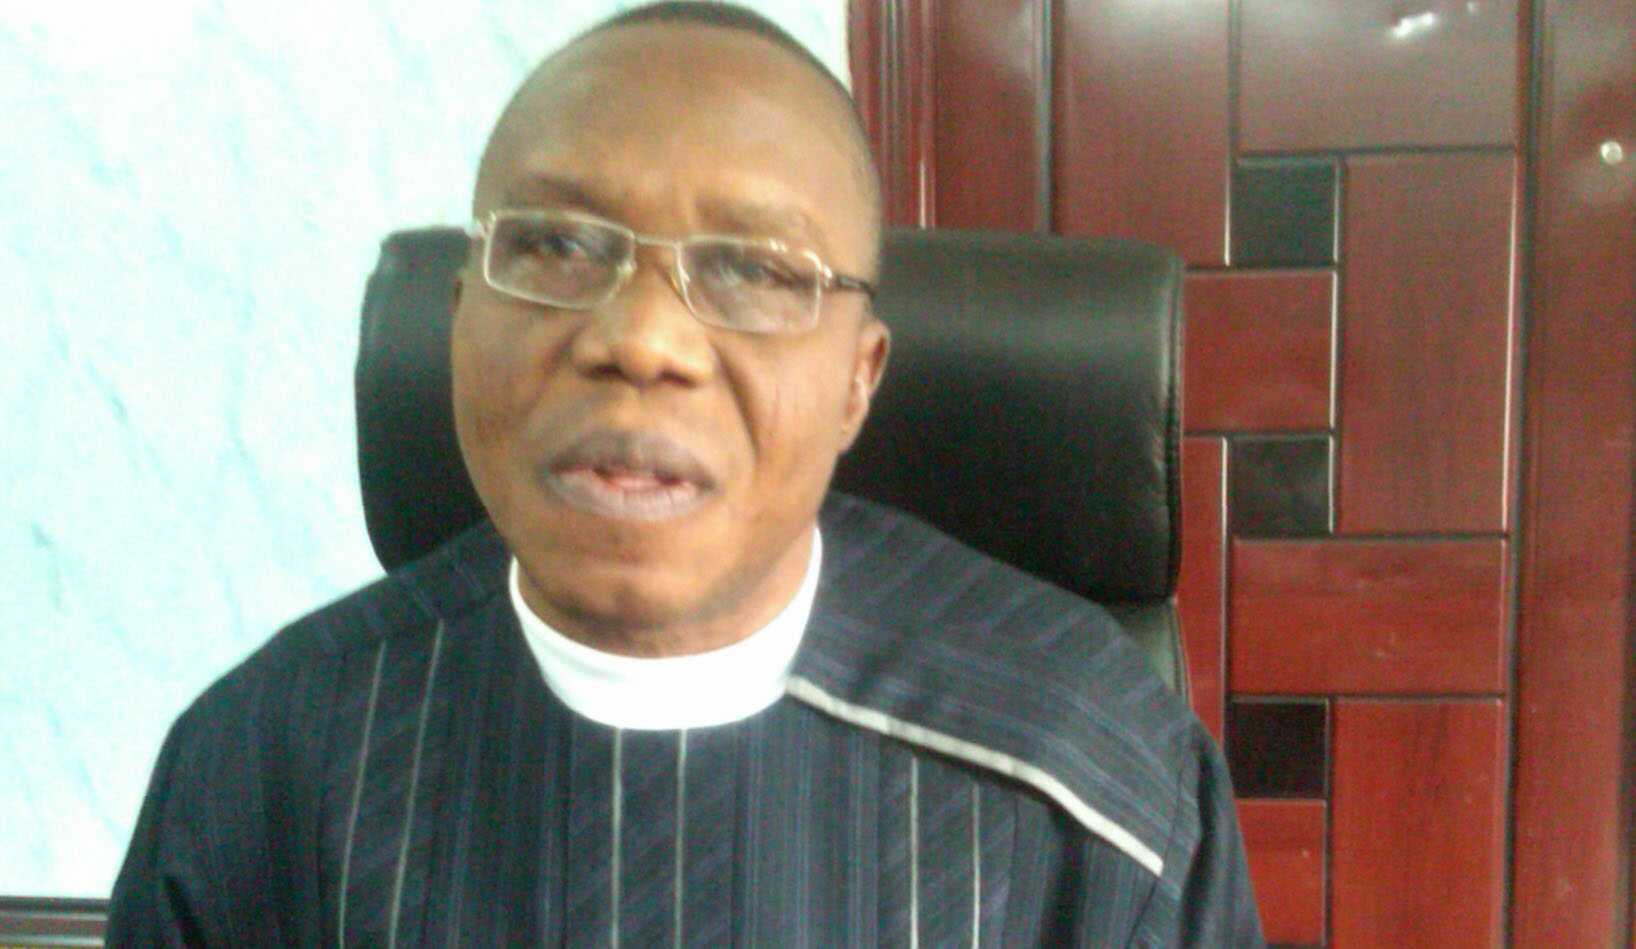 Court rules against Rev Emeka in AOG church’s Over leadership tussle